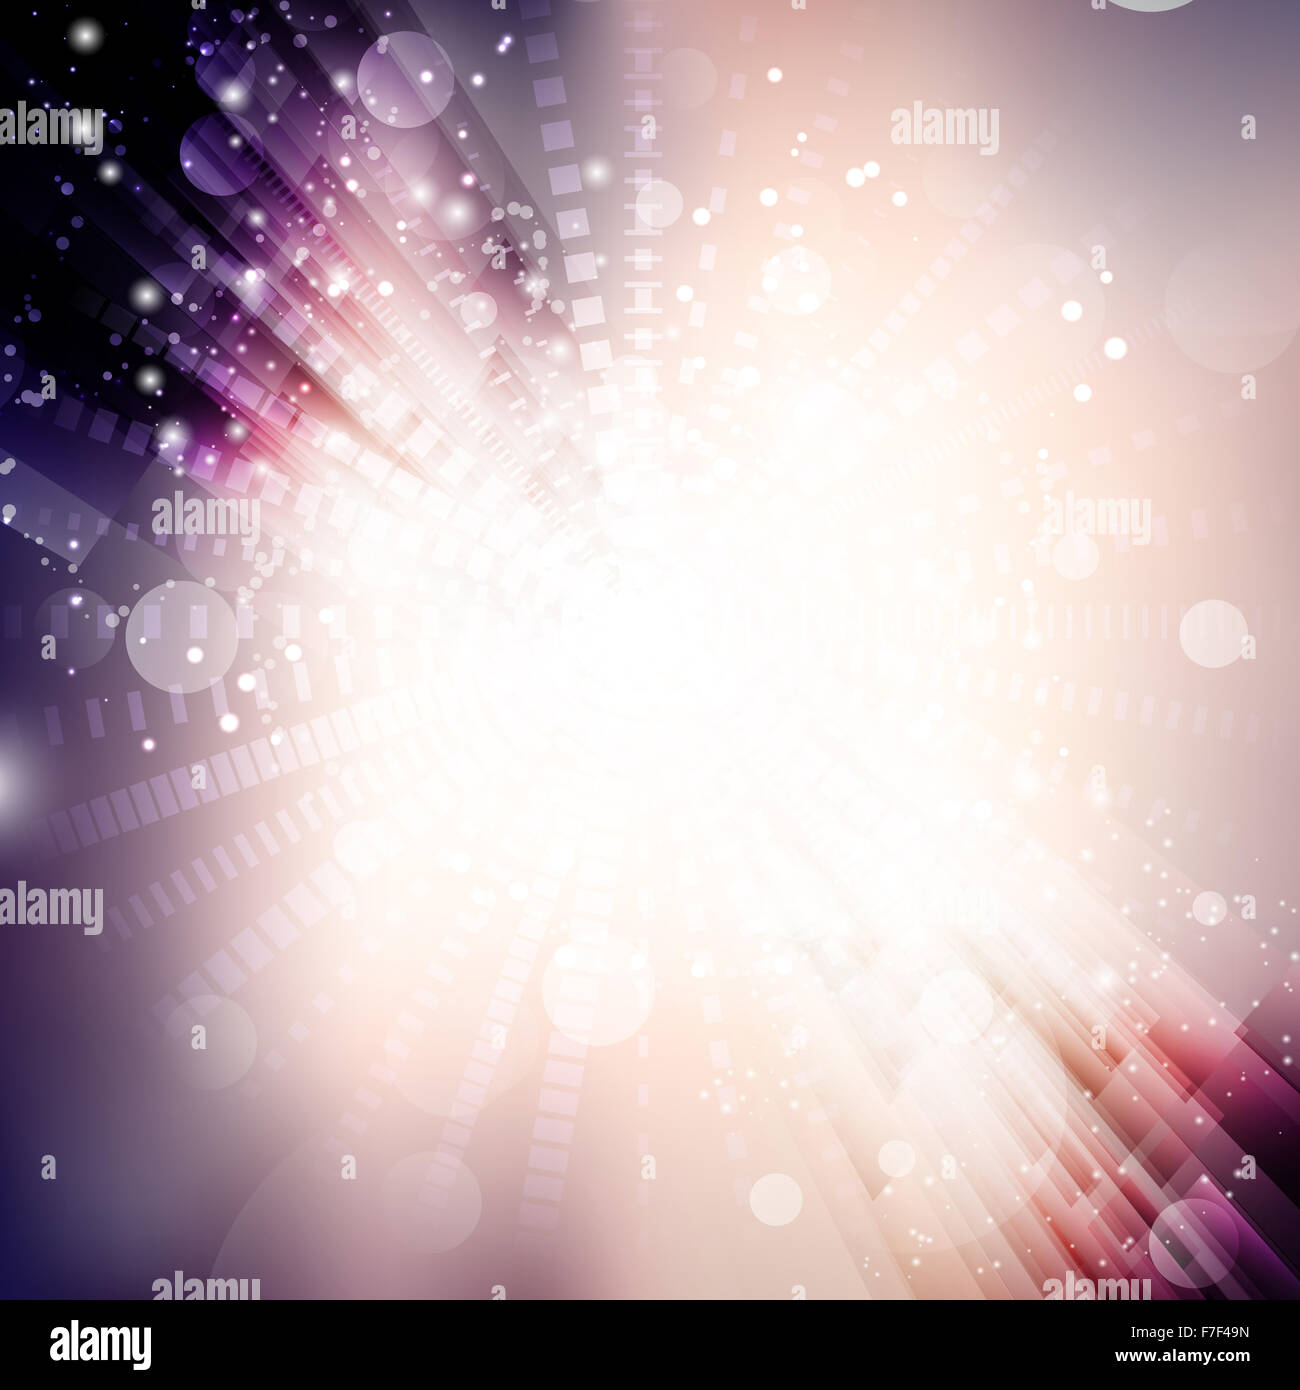 Abstract background with a starburst design Stock Photo